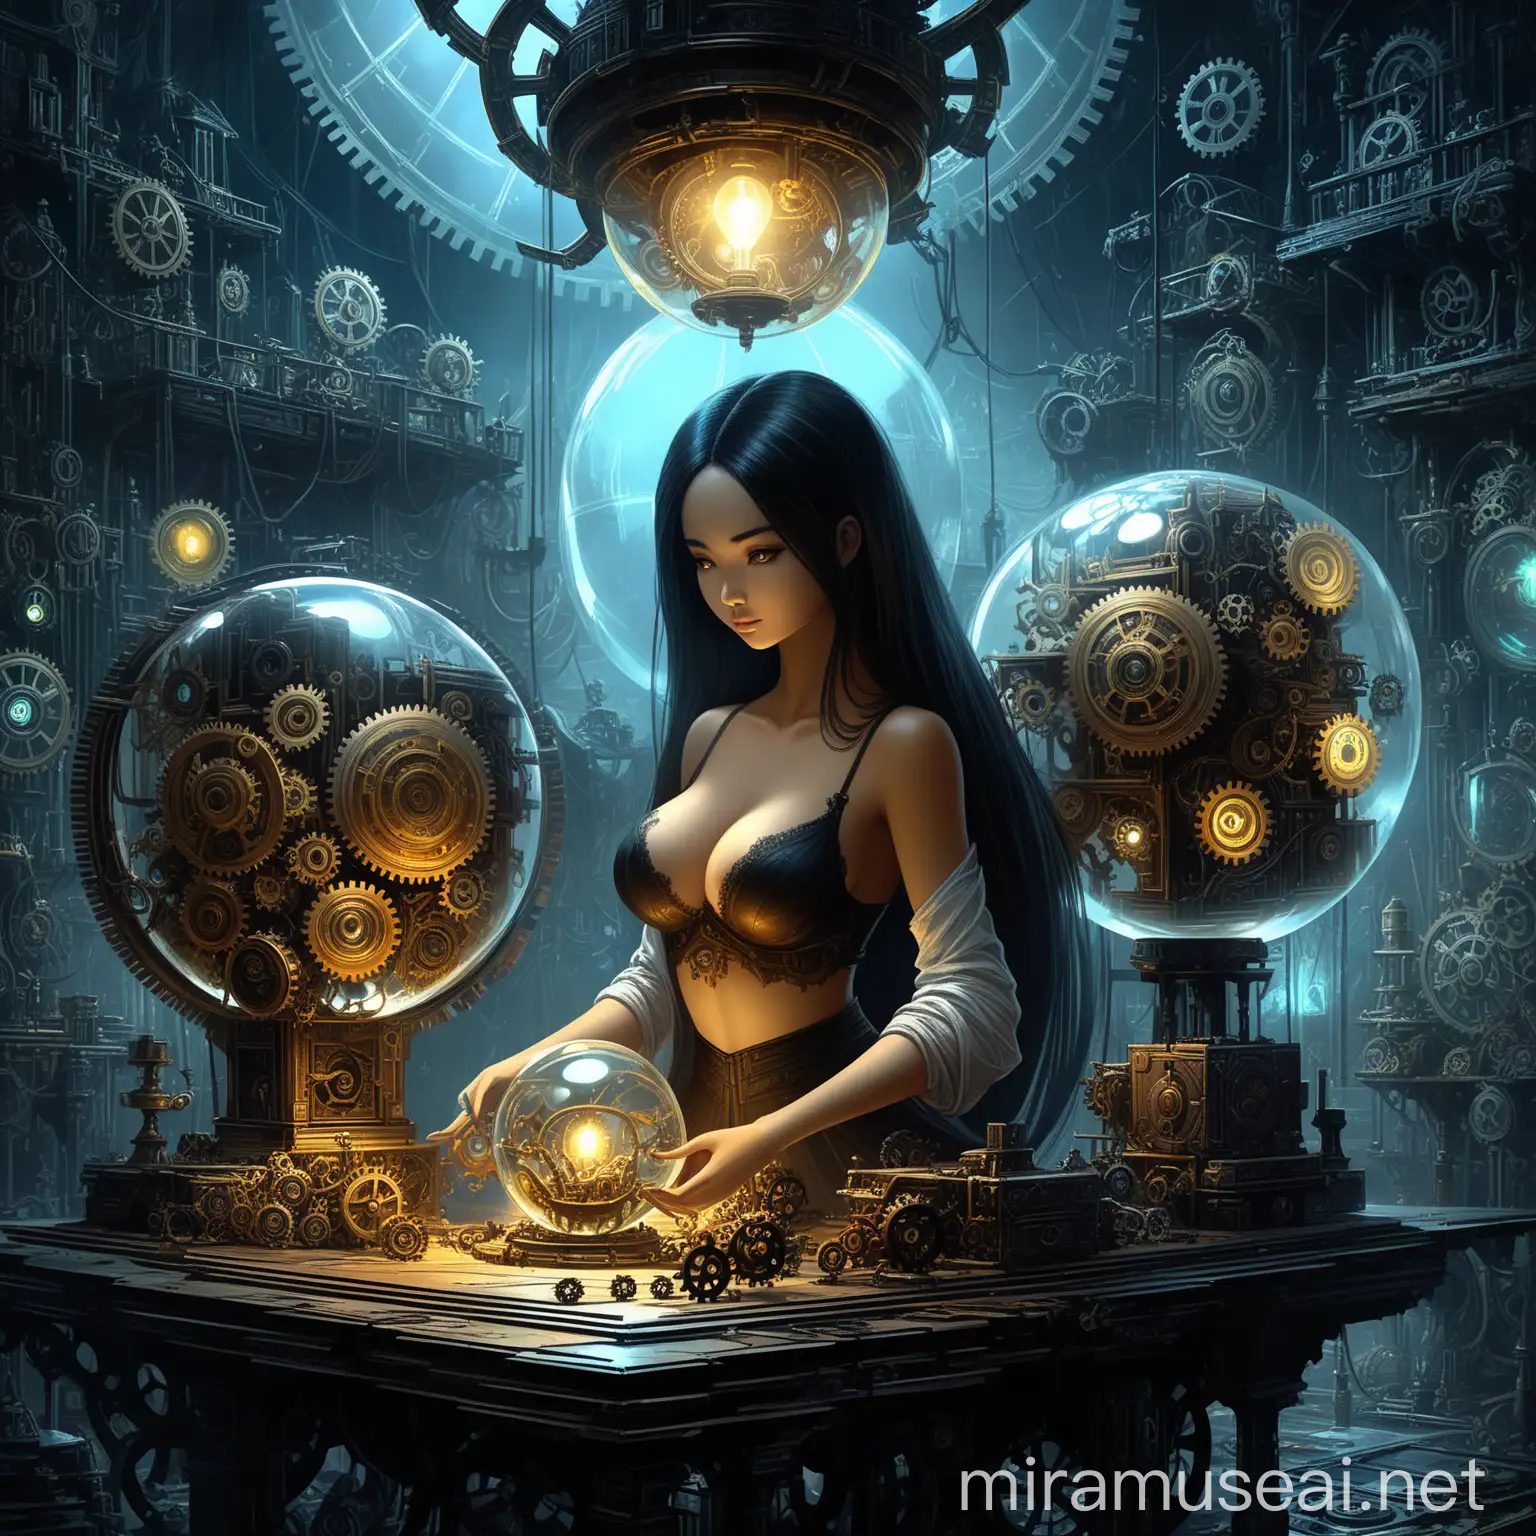 A beautiful young Indonesia woman with luxurious very long black hair, dressed transparan minimalis open bra assembles a magical mechanical sphere in a cube, a cache of gears on the table, many small gears, night, light from an old electric lamp, fantasy art, art, concept art renaissance, detailed, 8k, classicism, cyberpunk